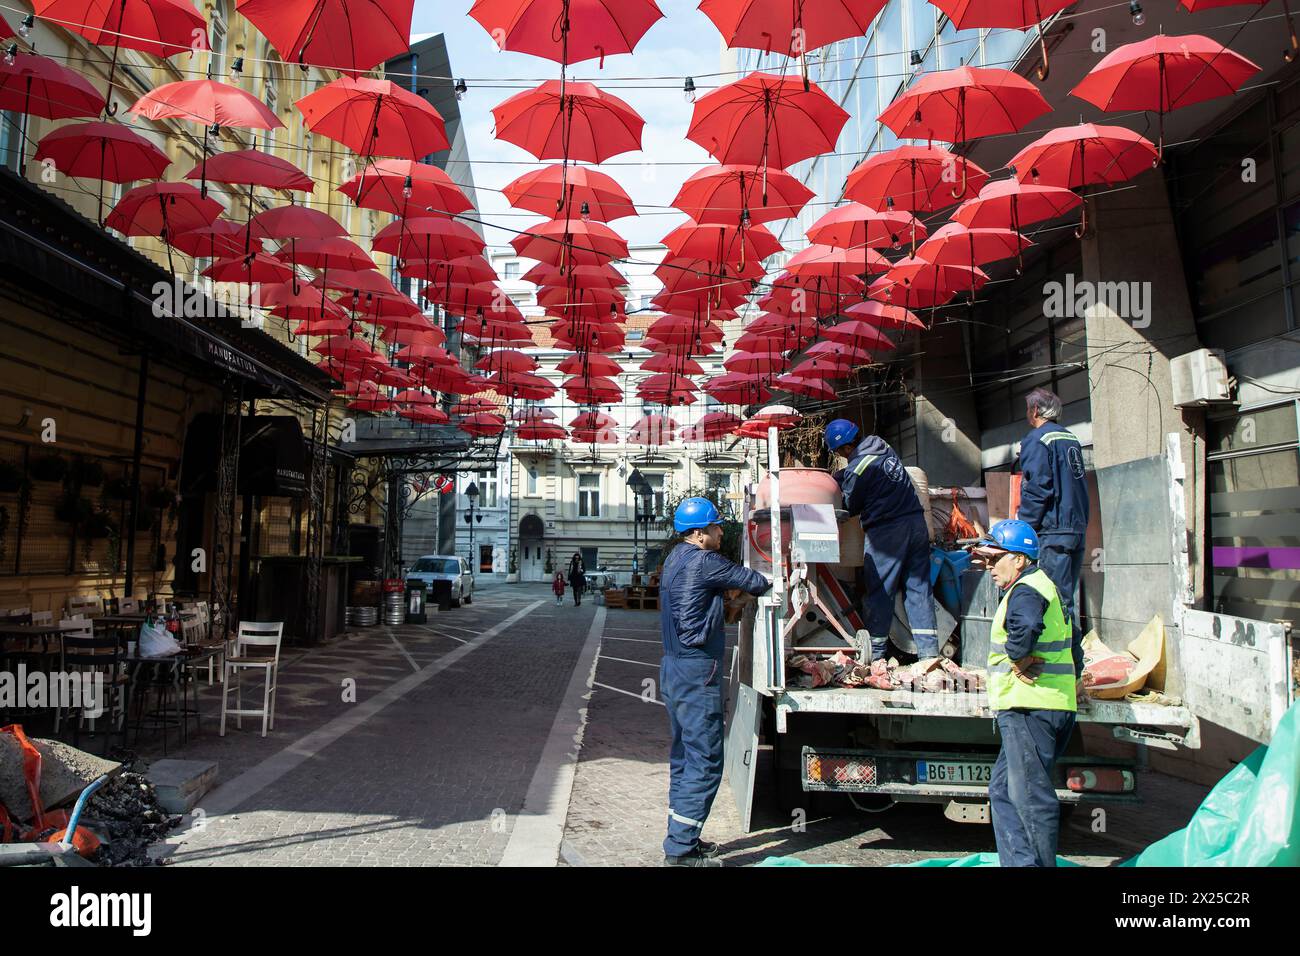 Belgrade, Serbia, March 2019 - Construction workers on the job under red umbrellas suspended above the Cara Lazara Street in pedestrian city zone Stock Photo